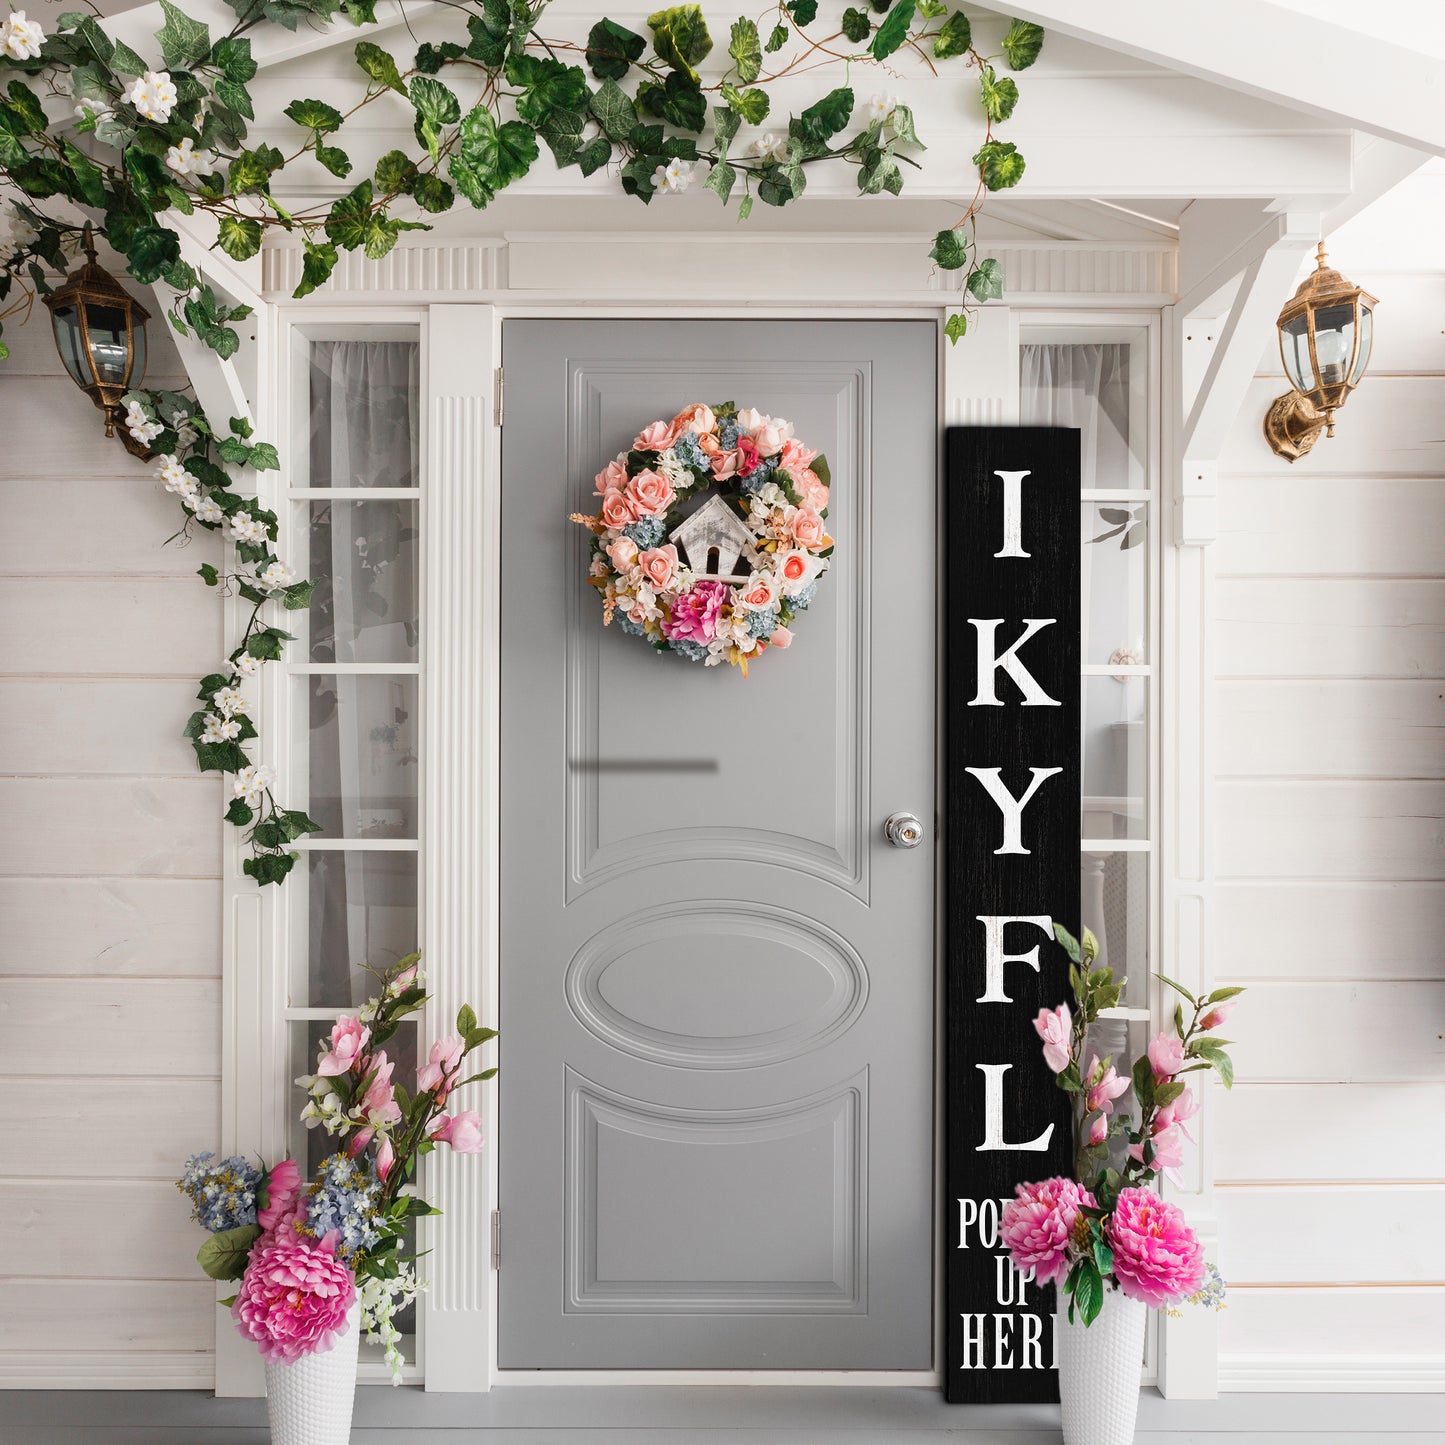 72in "IKYFL Poppin Up Here" Wooden Porch Sign | Bold & Playful Entryway Decor | Fun Door Sign for Home, Porch, Patio | Black